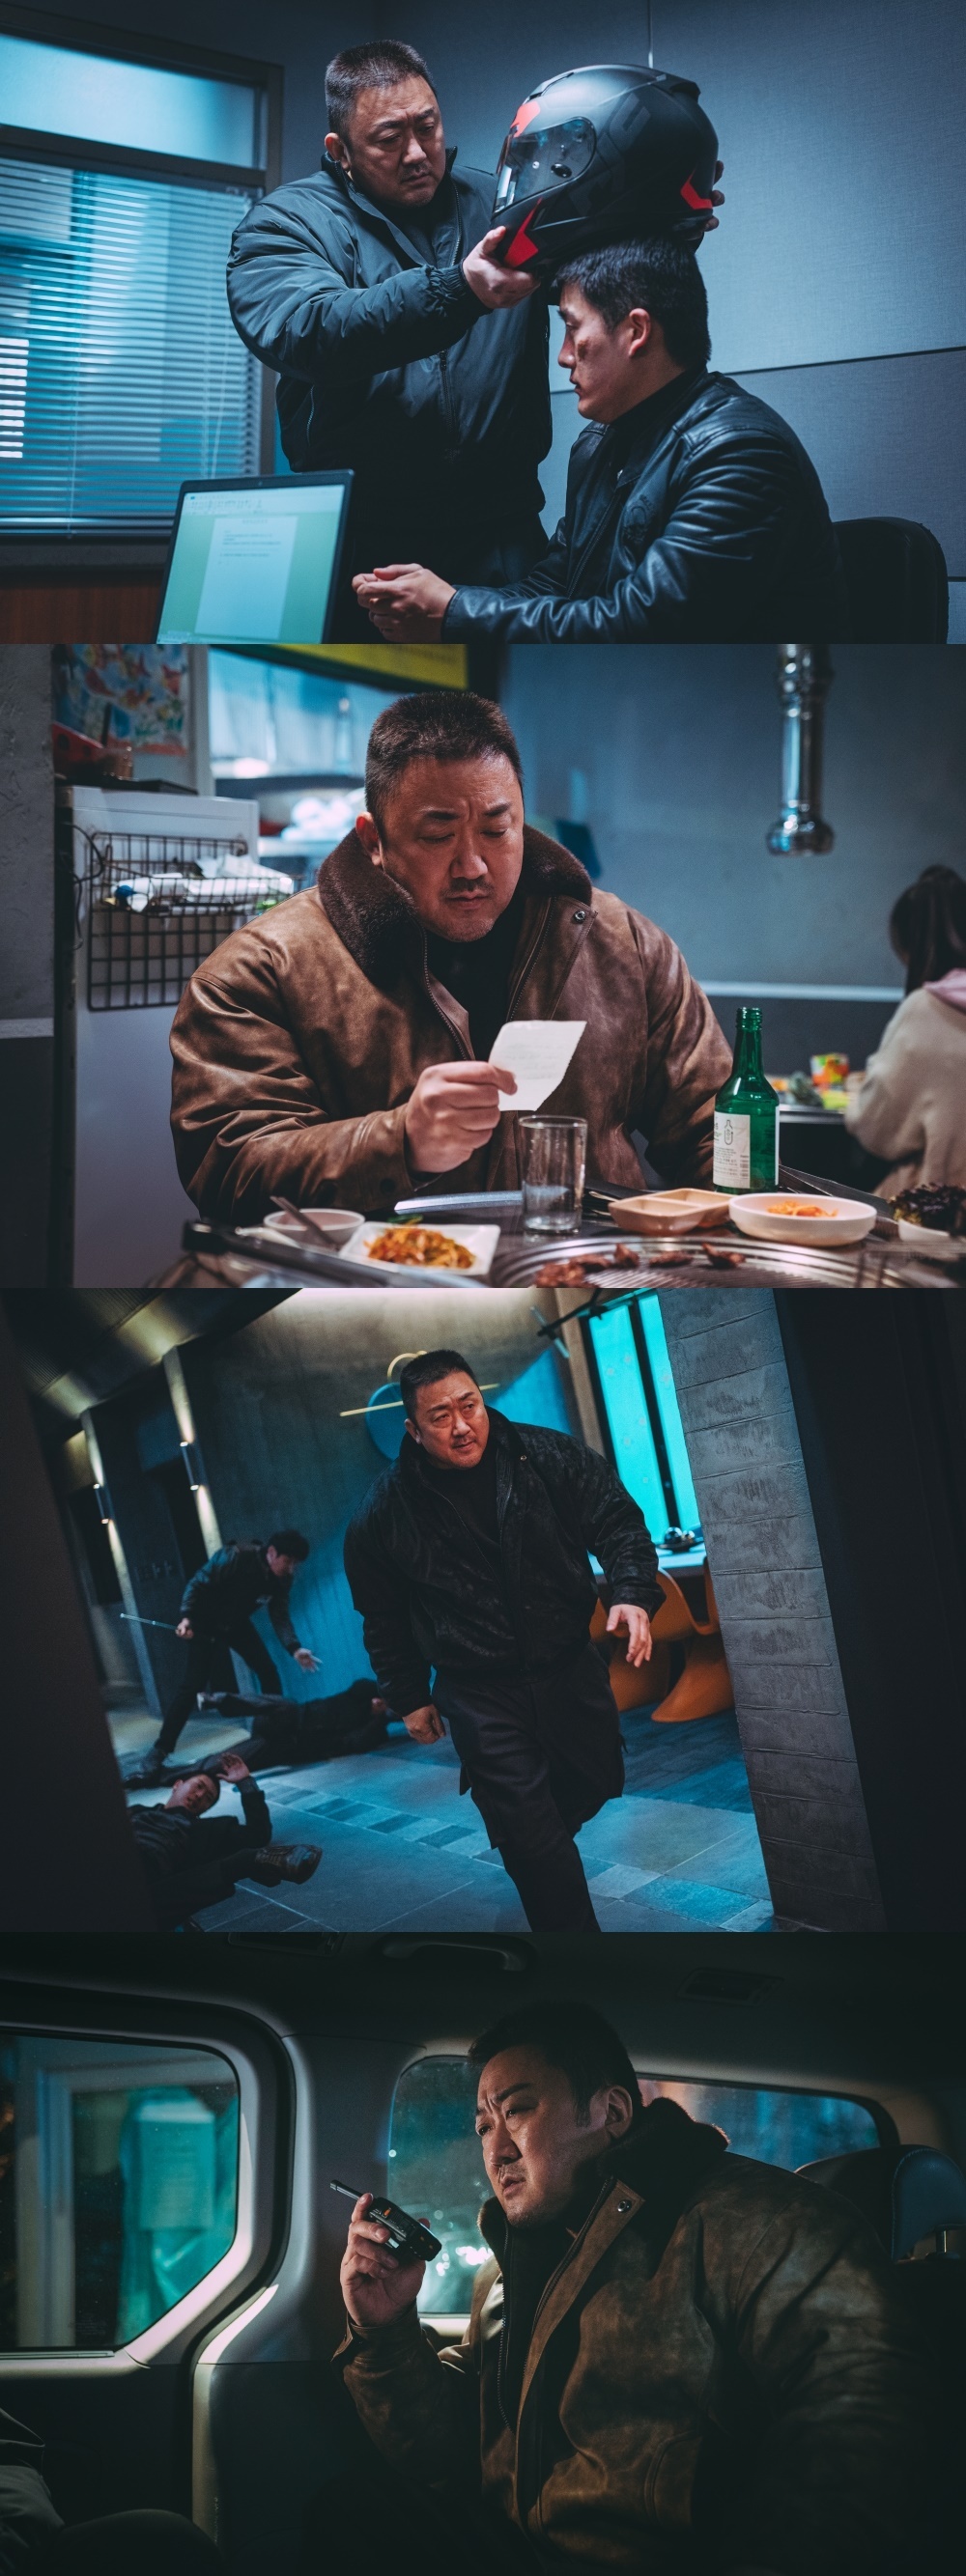 Ma Dong Seok Is Back Stronger Than Ever In Upcoming Crime Action Film “The Roundup : Punishment”